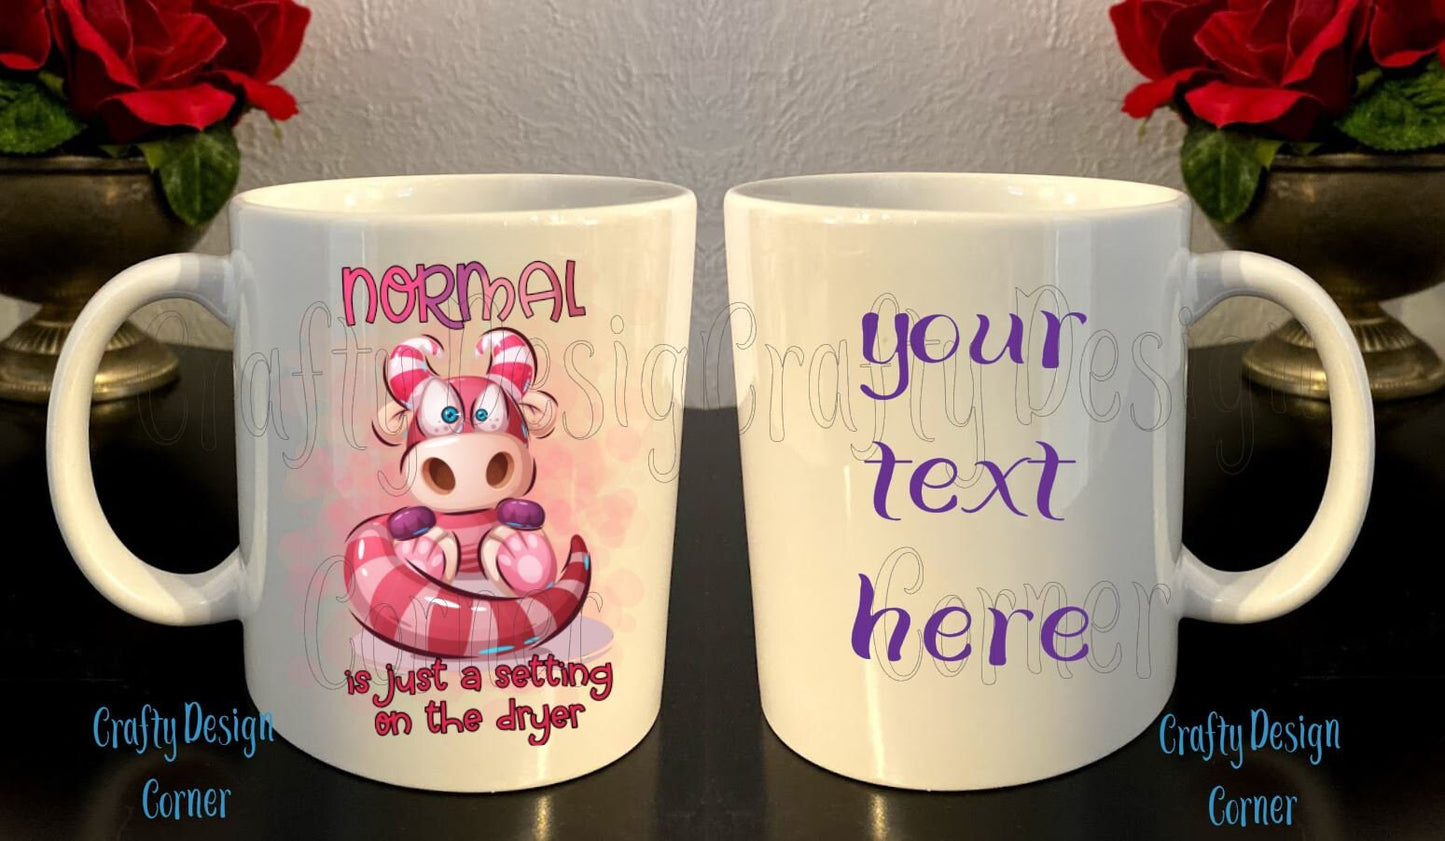 Normal is just a setting on the dryer Mug